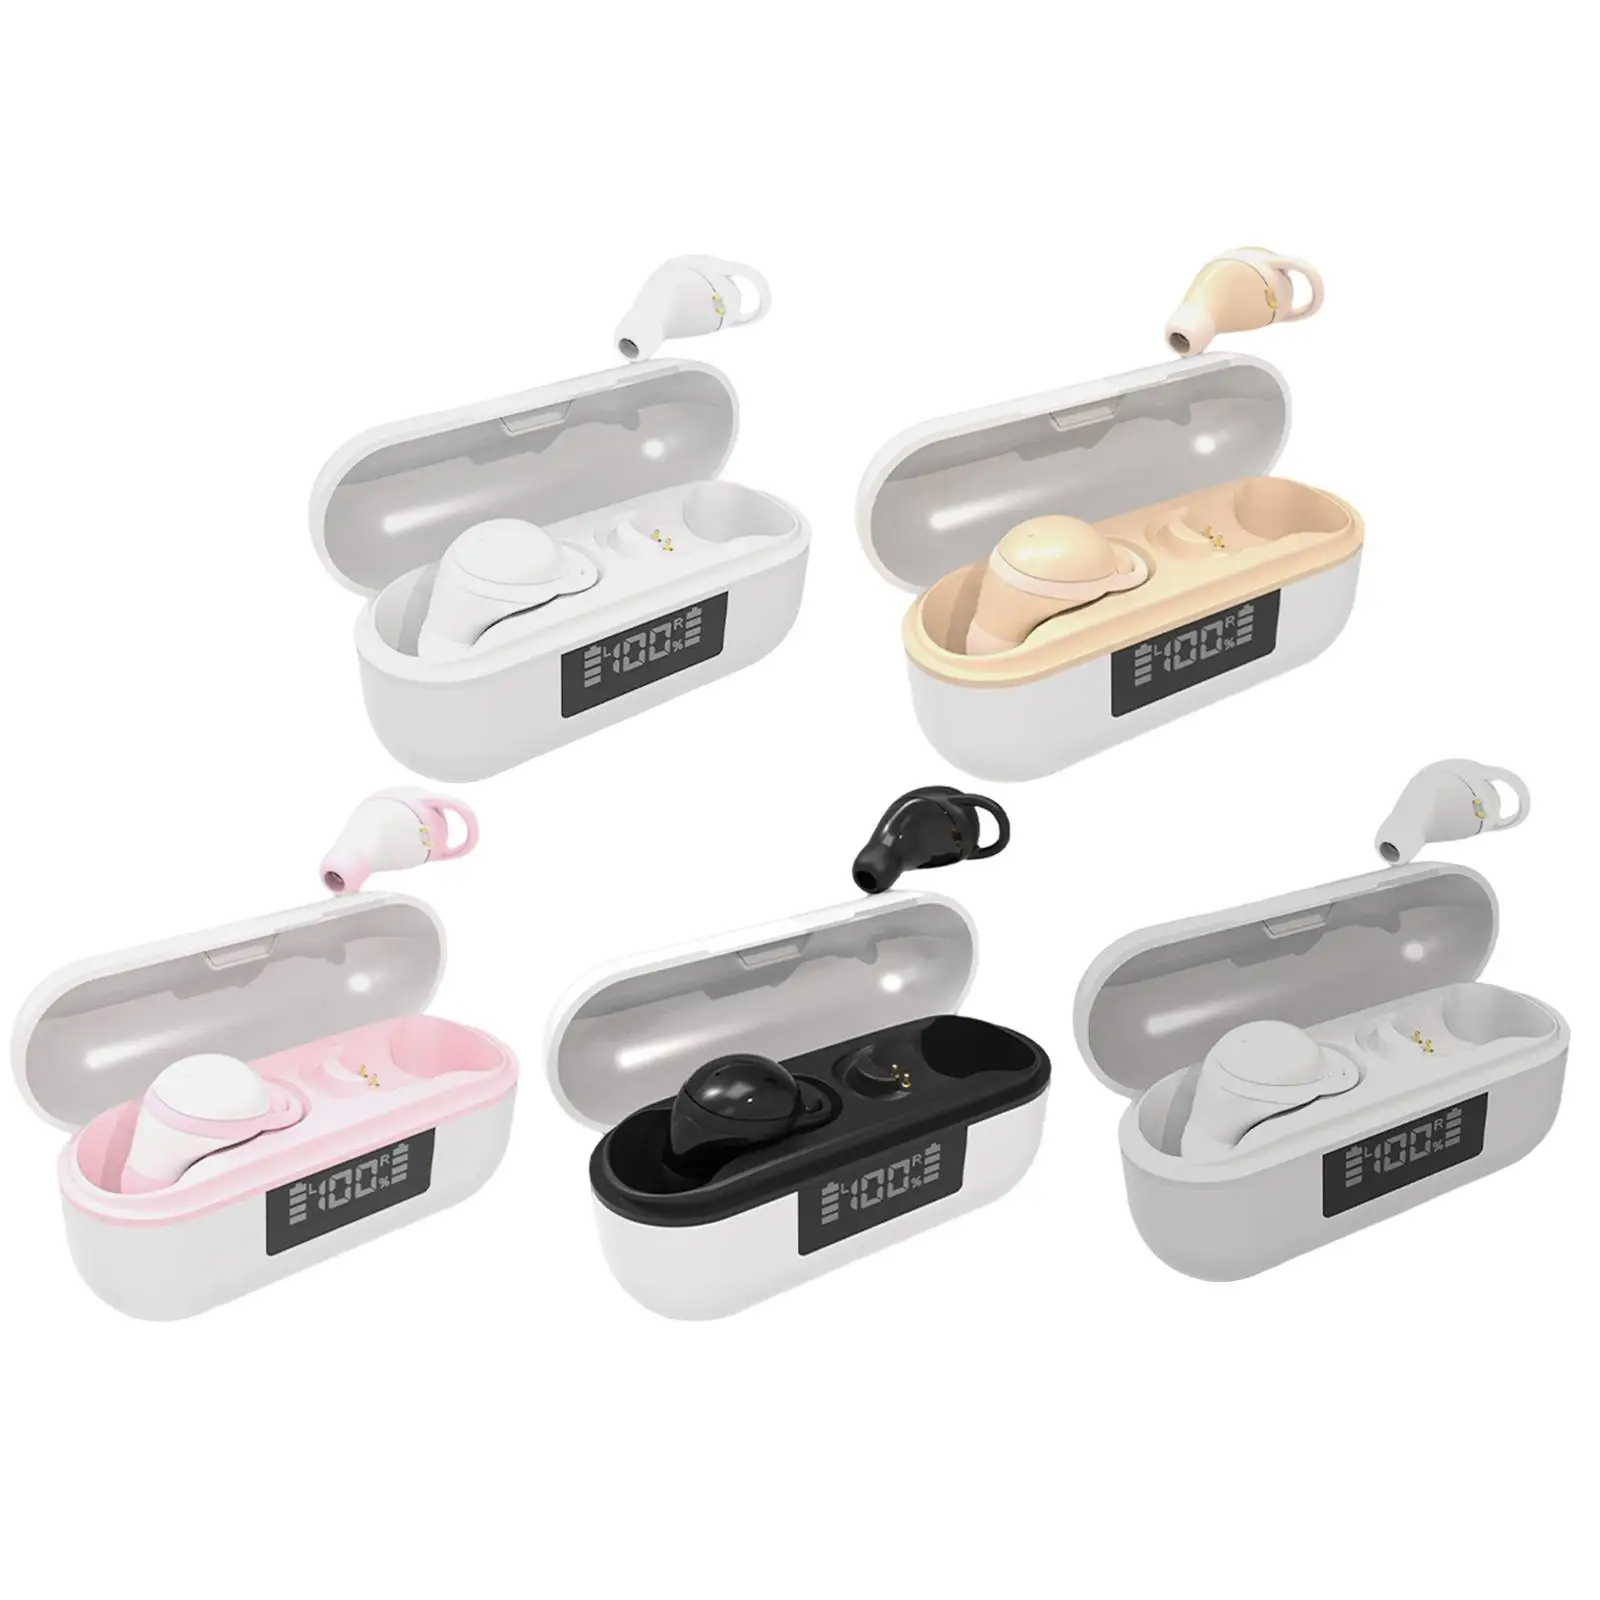 Bluetooth Headset Invisible True Wireless with Charging Case Eating Chicken Bluetooth 5.2 Small Earpiece for Sleeping Life Sport